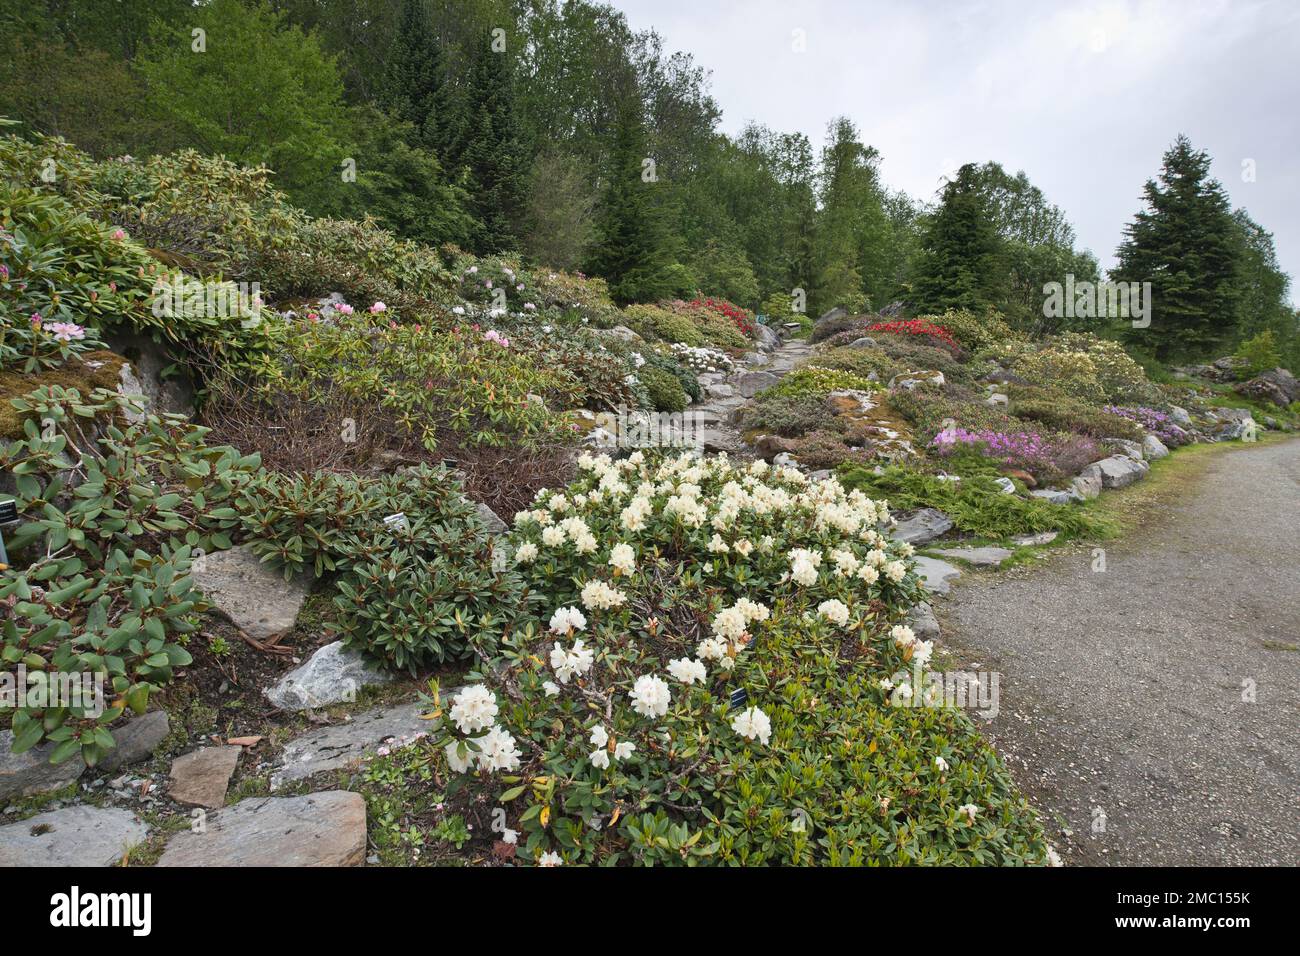 Tromso Arctic-Alpine Botanical Garden, Norway, rhododendrons (Rhododendron) Stock Photo